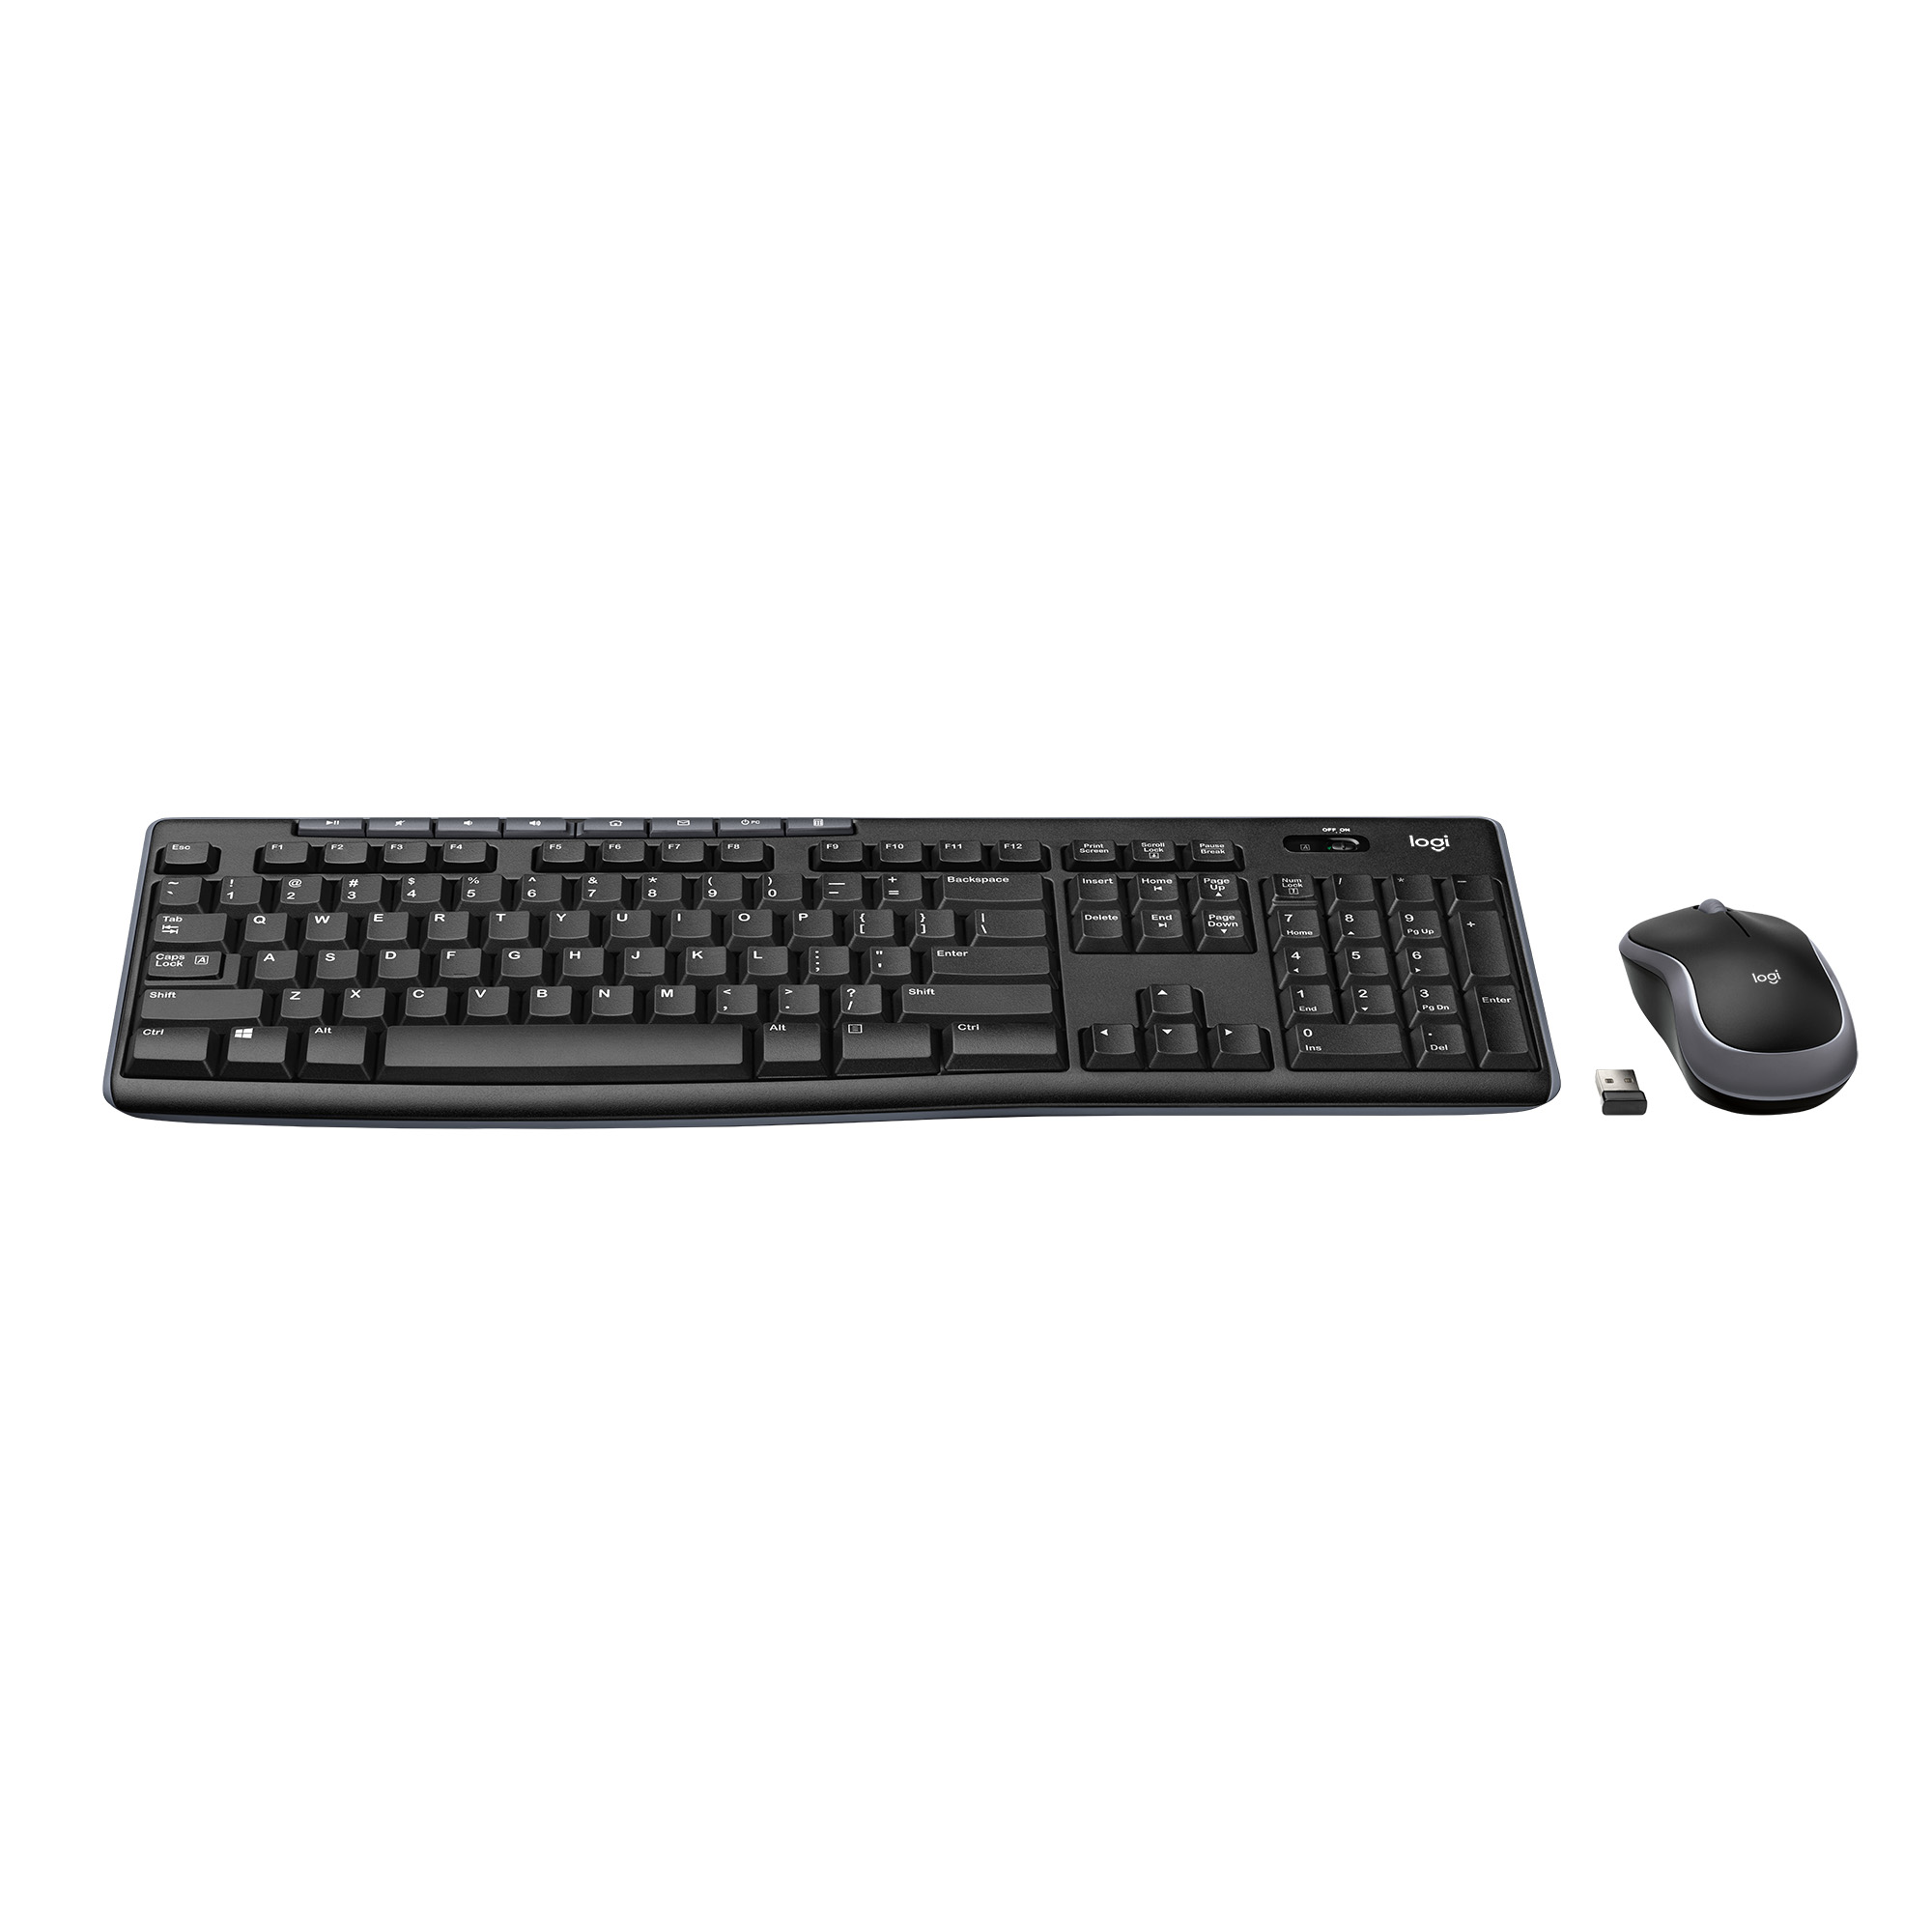 Logitech Wireless Keyboard and Mouse Combo for Windows, 2.4 GHz Wireless, Compact Mouse, 8 Multimedia and Shortcut Keys, 2-Year Battery Life, for PC, Laptop - image 2 of 6